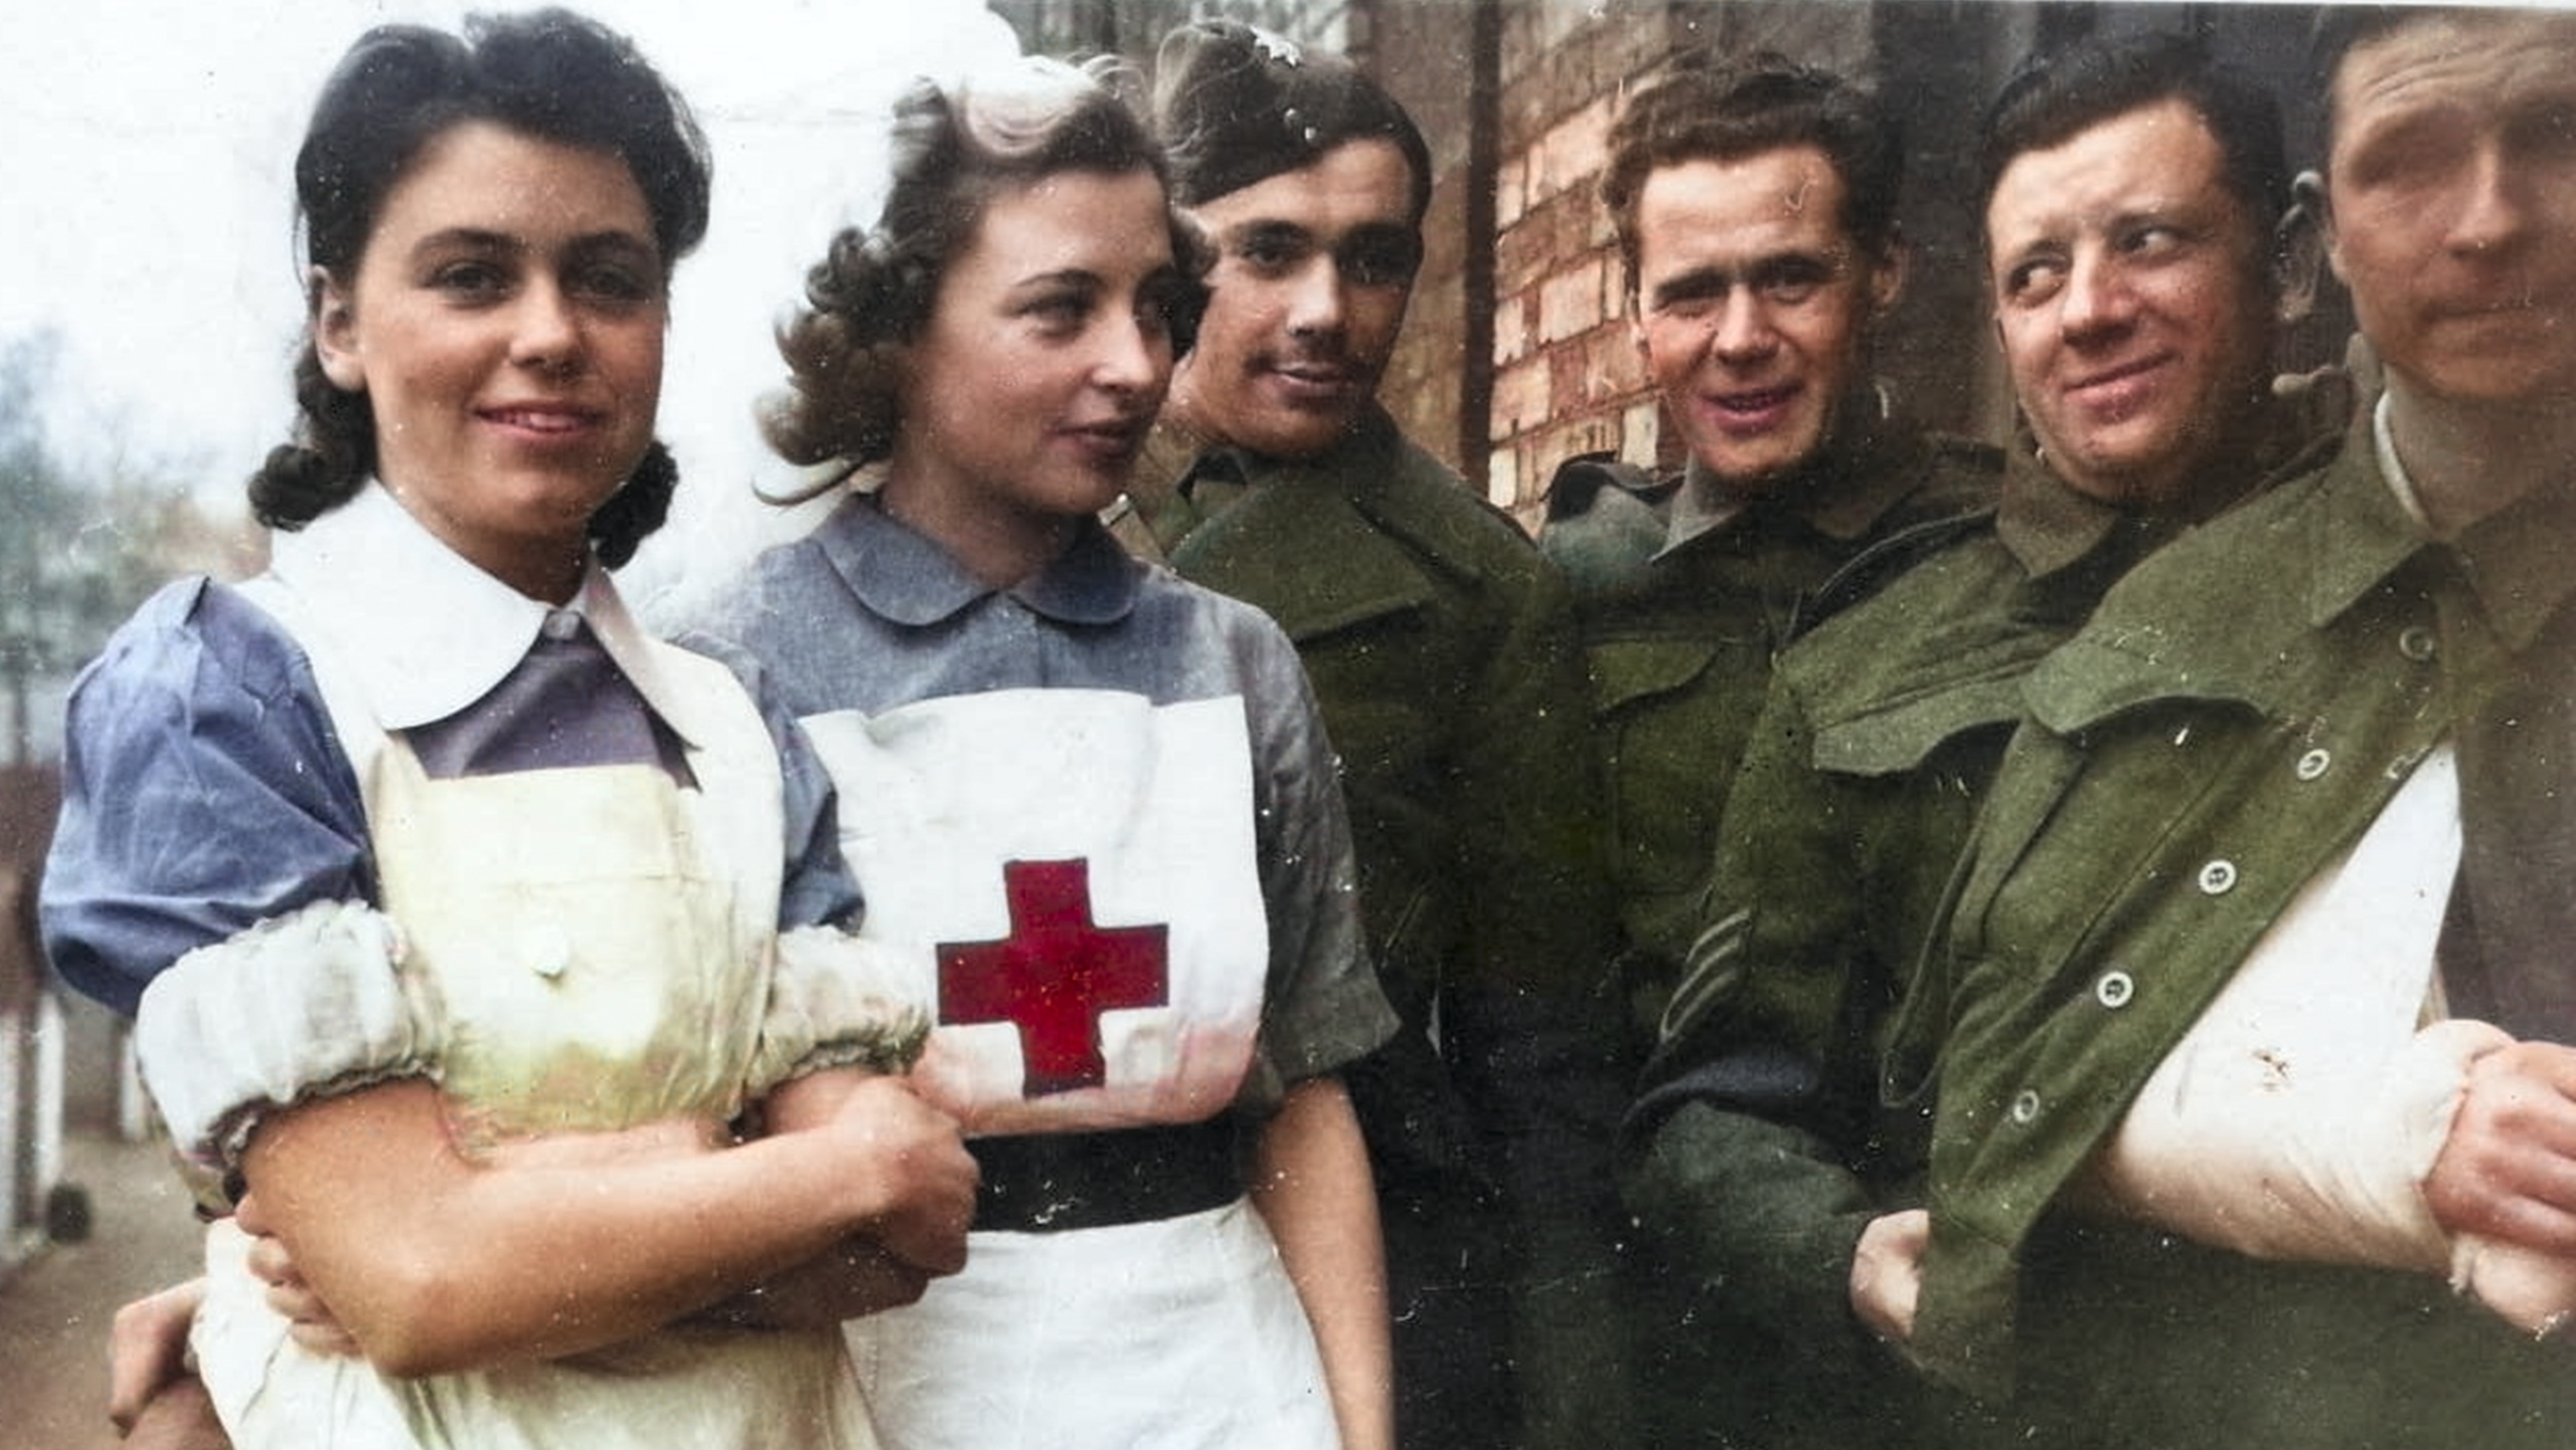 Two nurses and four soldiers in front of a brick building